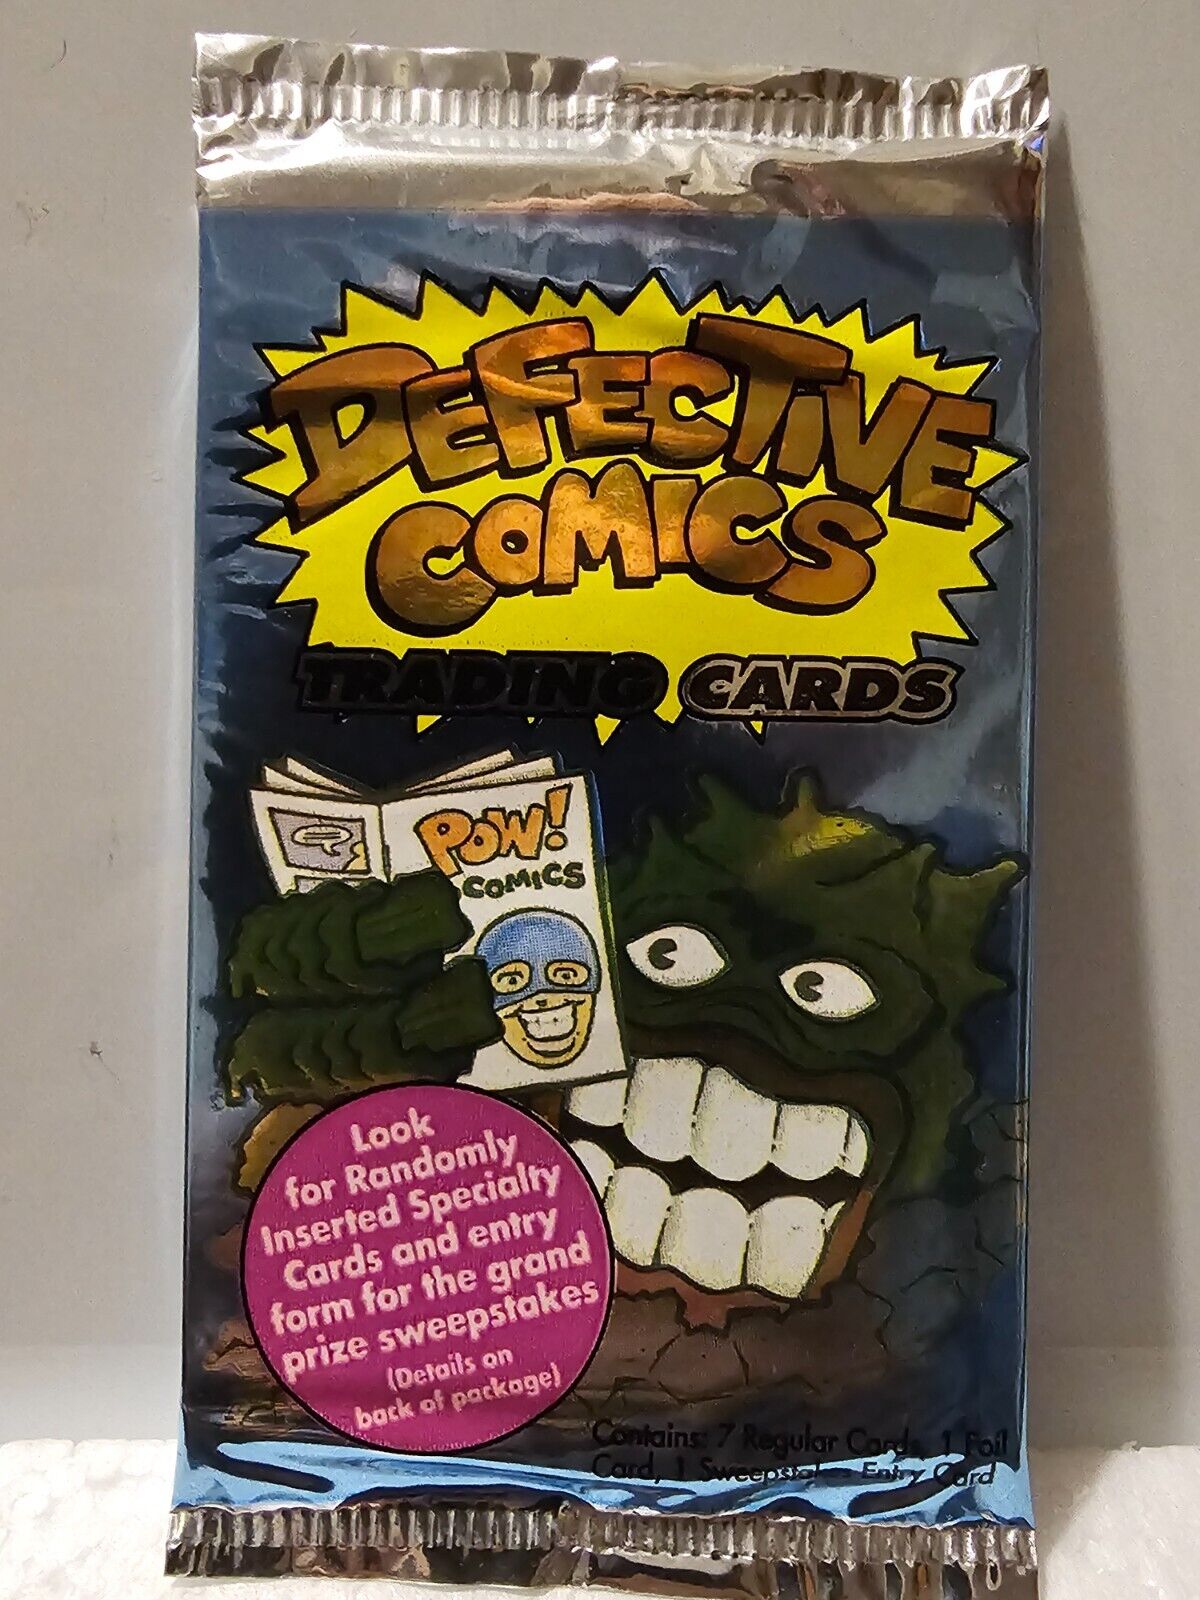 1993 Defective Comics Sealed Trading Card Pack NEW